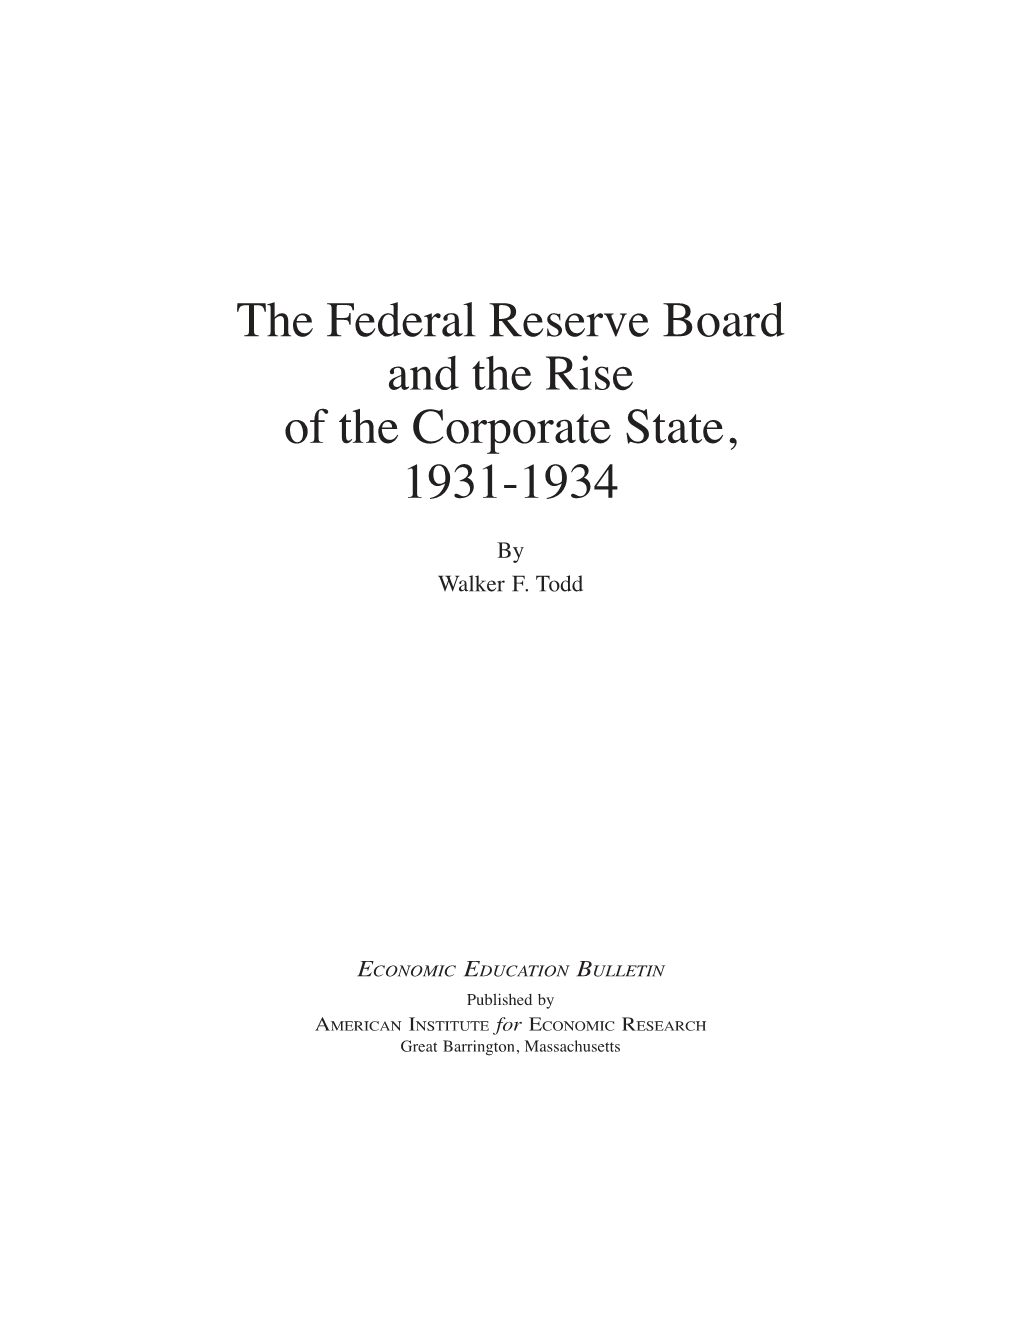 The Federal Reserve Board and the Rise of the Corporate State, 1931-1934